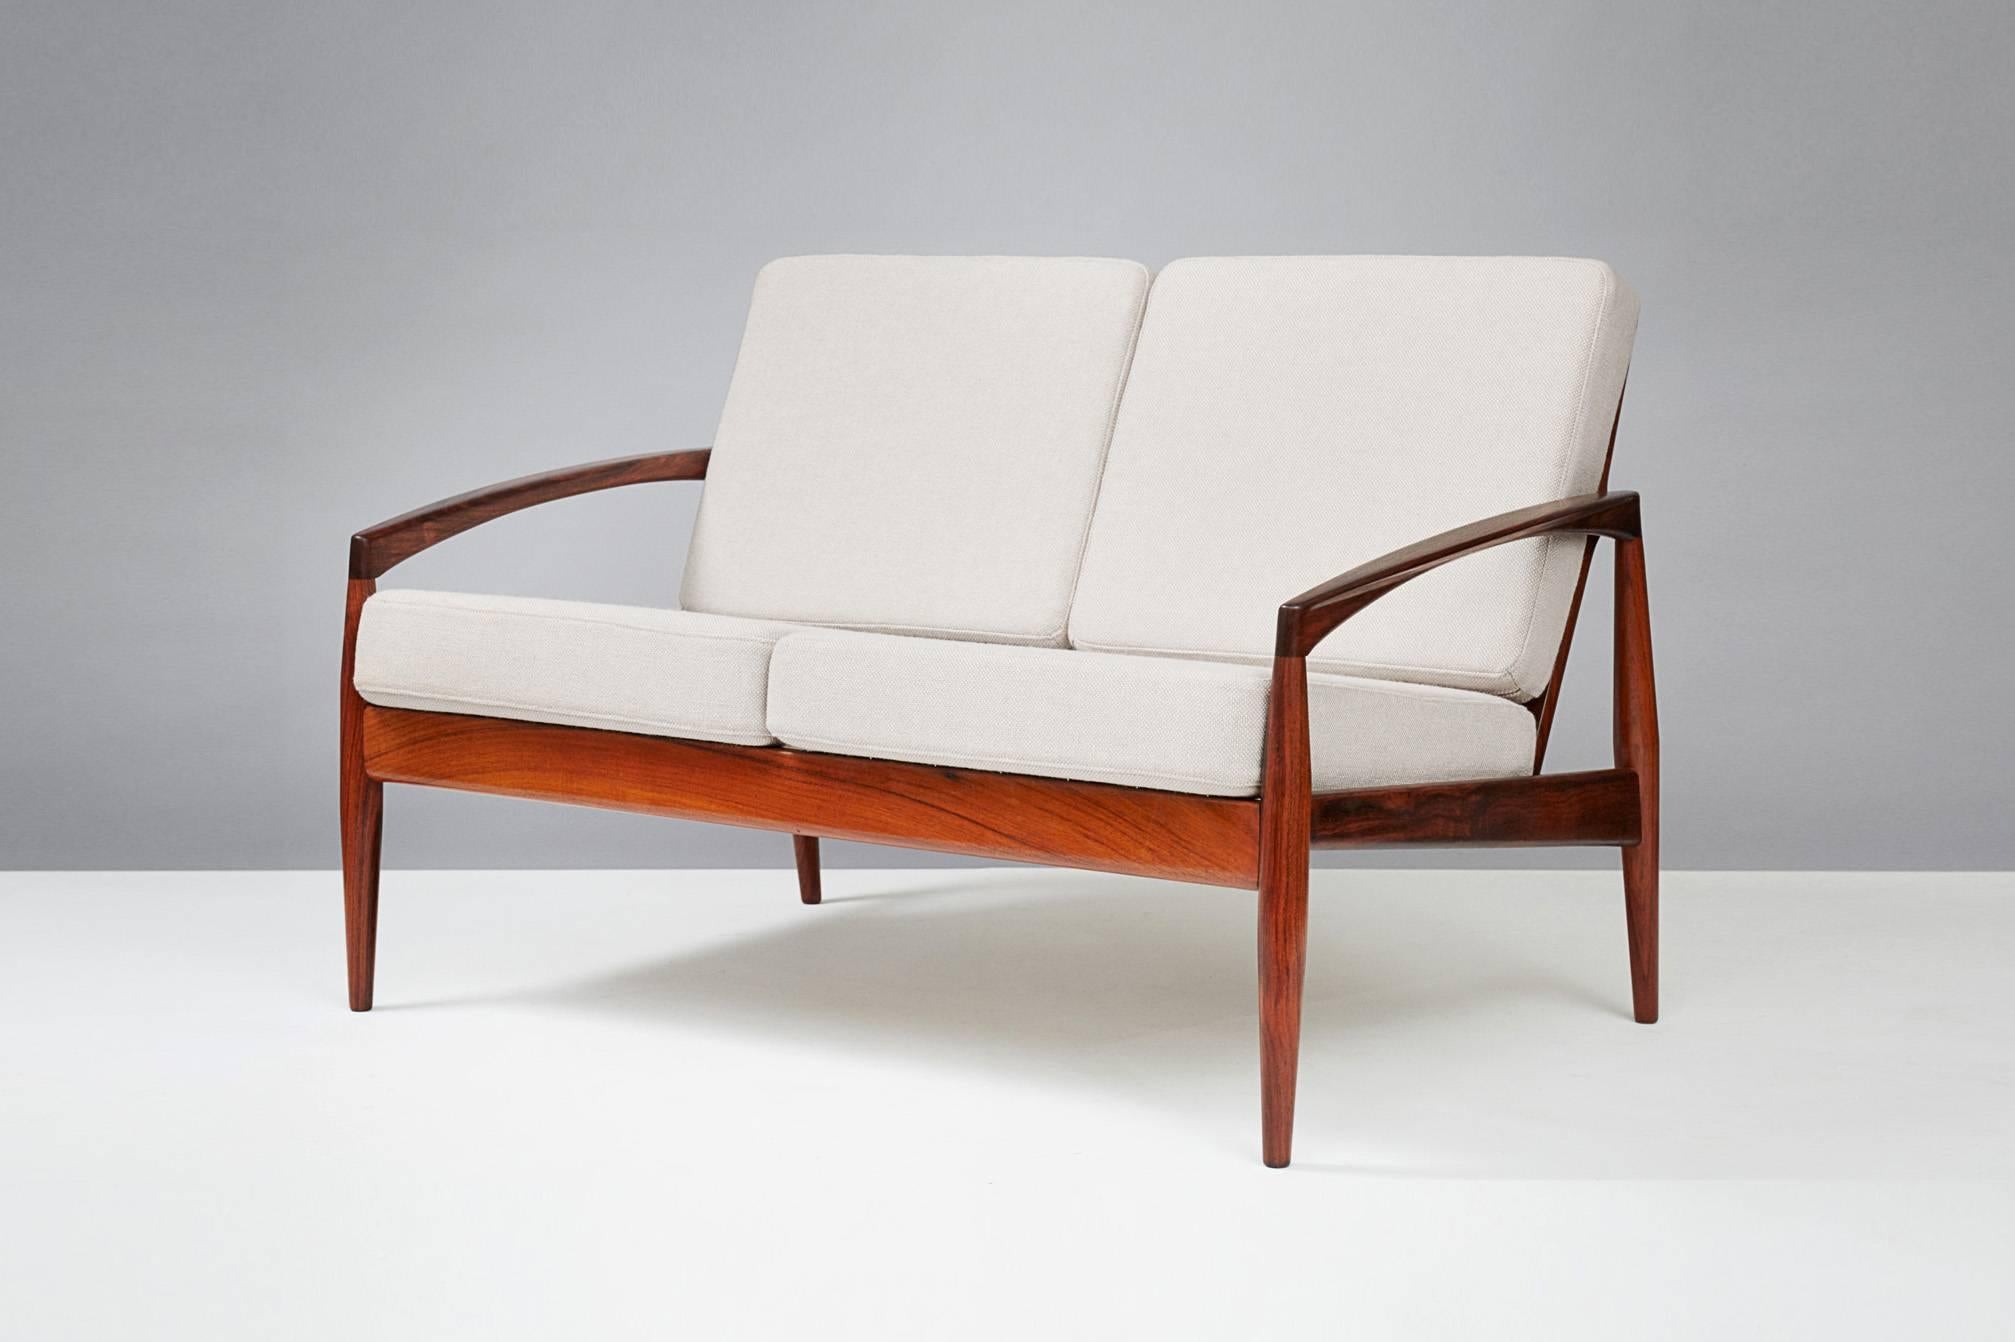 Kai Kristiansen

Paper knife sofa, 1955

Produced by Magnus Olesen, Denmark. Rarely seen example on the two person sofa made from rosewood. New cushions covered in Kvadrat Hallingdal #103 wool fabric.